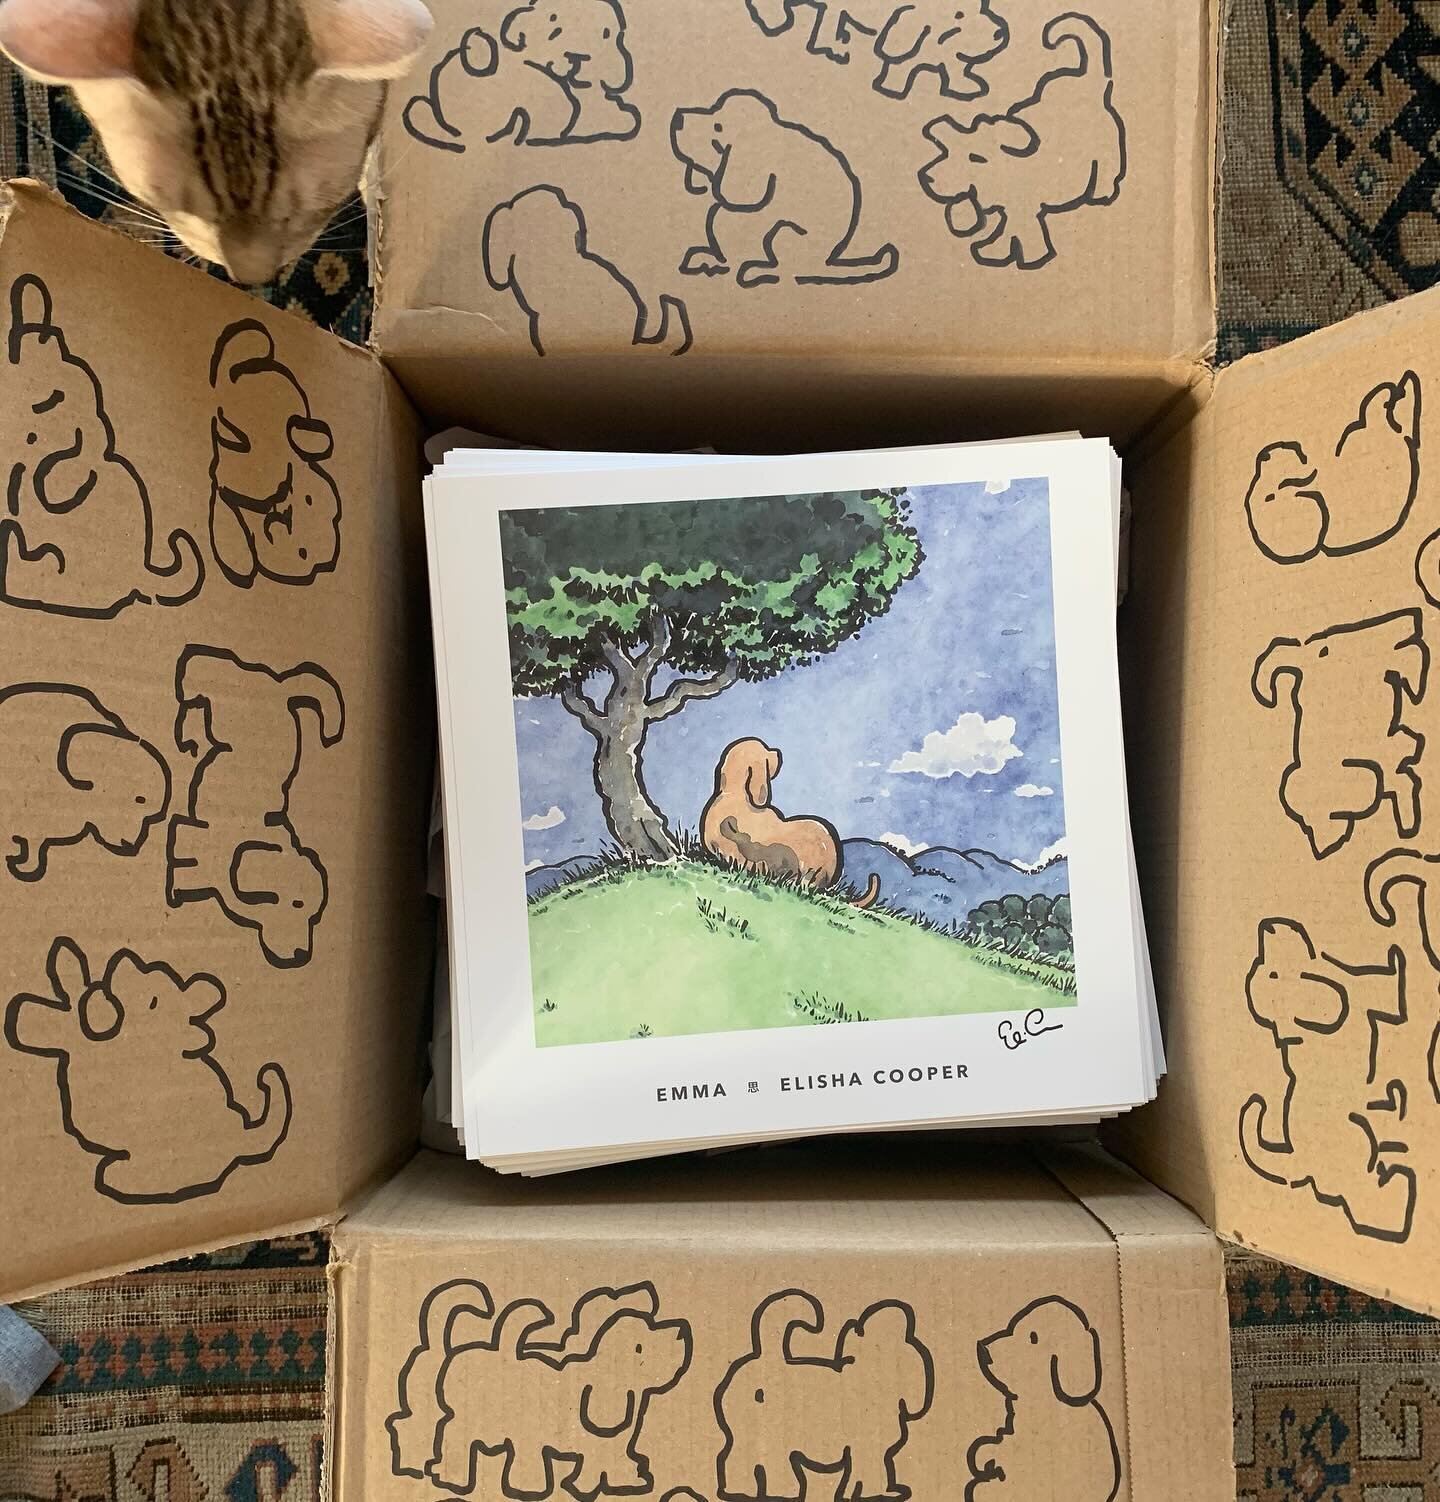 How many puppies in the box?
Actually, only cats! And Emma prints, printed by @mackidsbooks, and signed by me, and heading out soon to independent bookstores across the country 

#bookstagram
#picturebook
#childrensbookstagram
#kidsbookstagram 
#elem